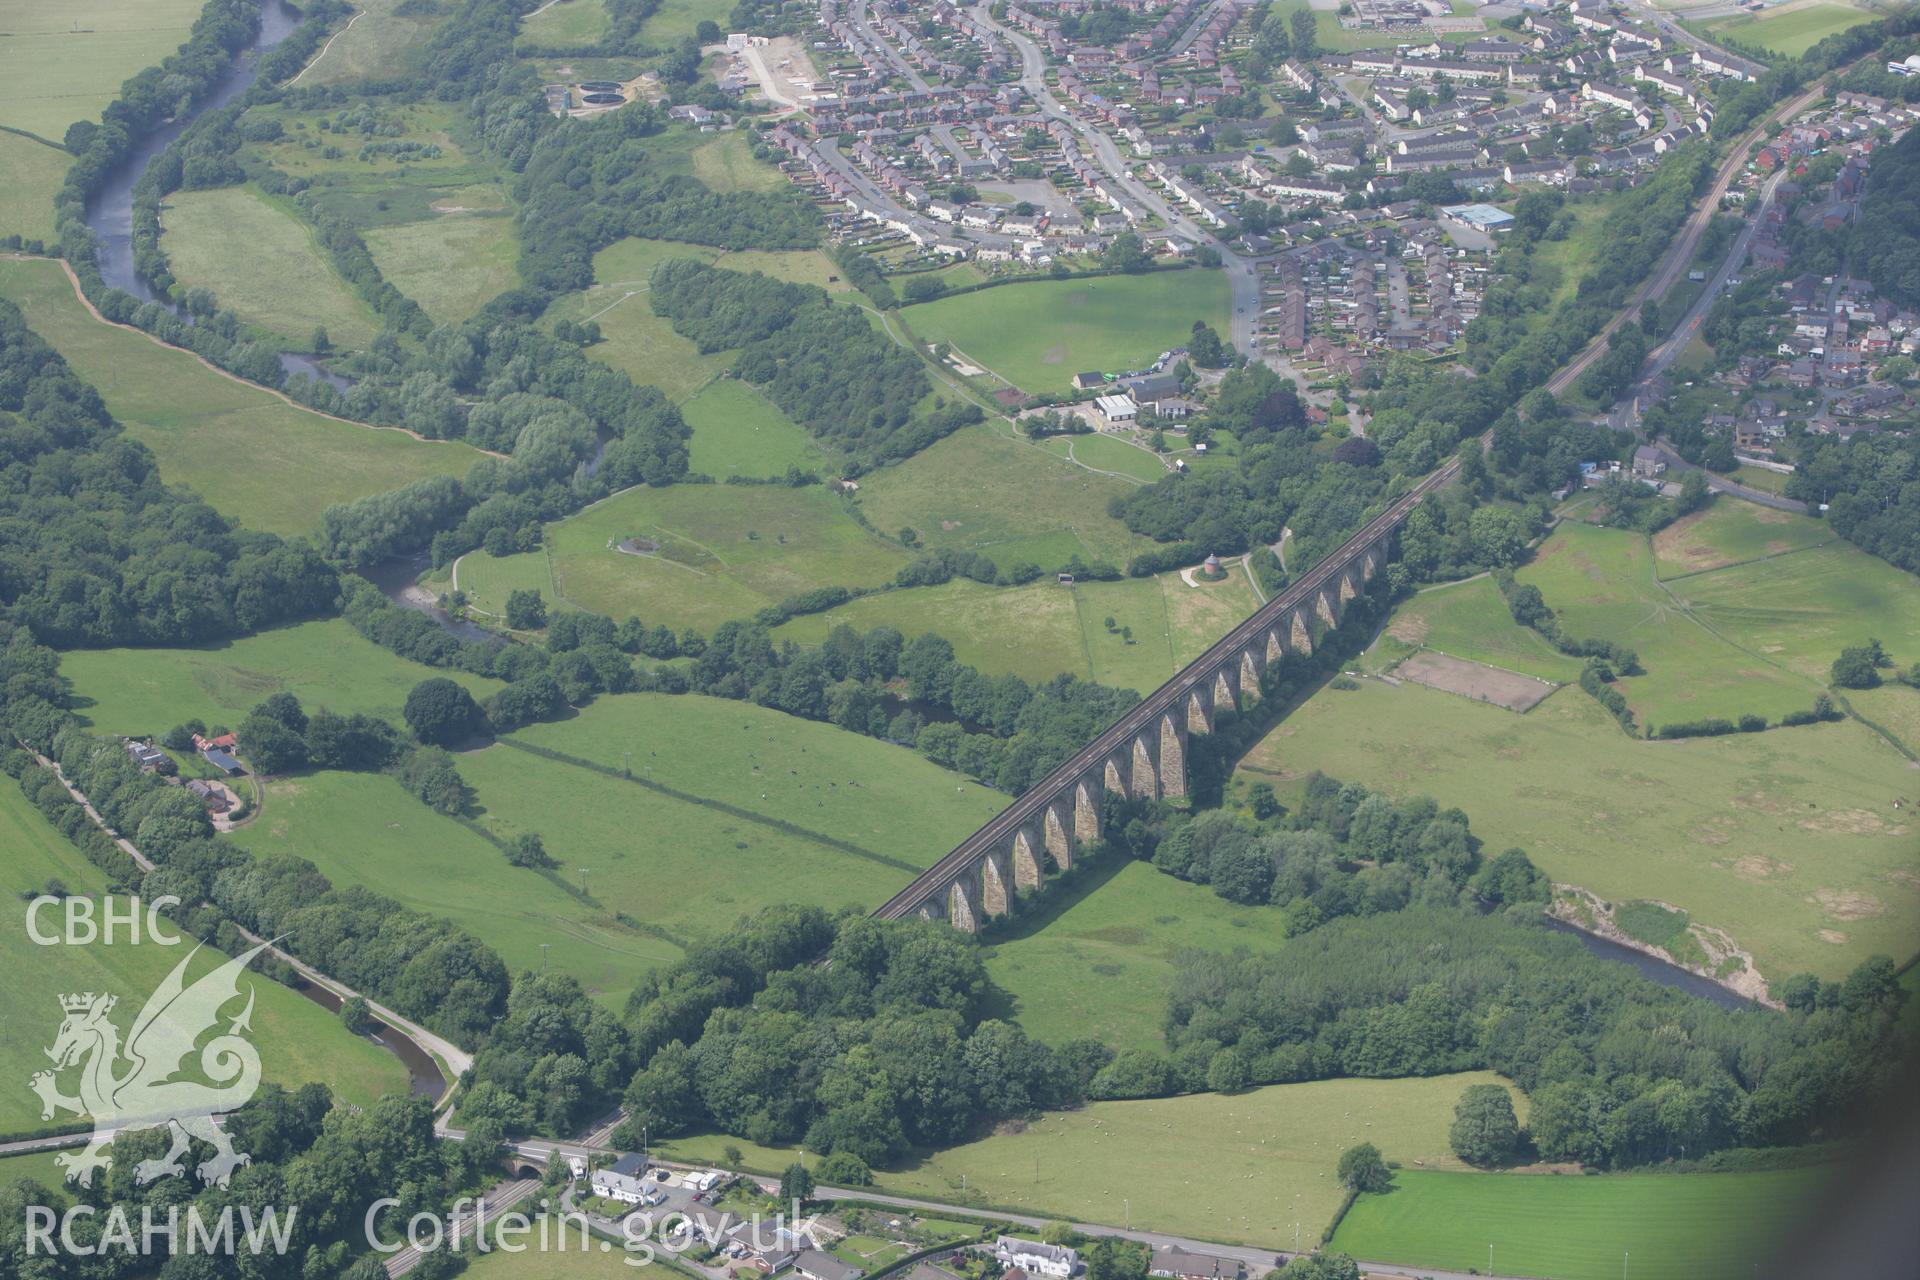 RCAHMW colour oblique photograph of Cefn Bychan (Newbridge) Viaduct. Taken by Toby Driver on 01/07/2008.